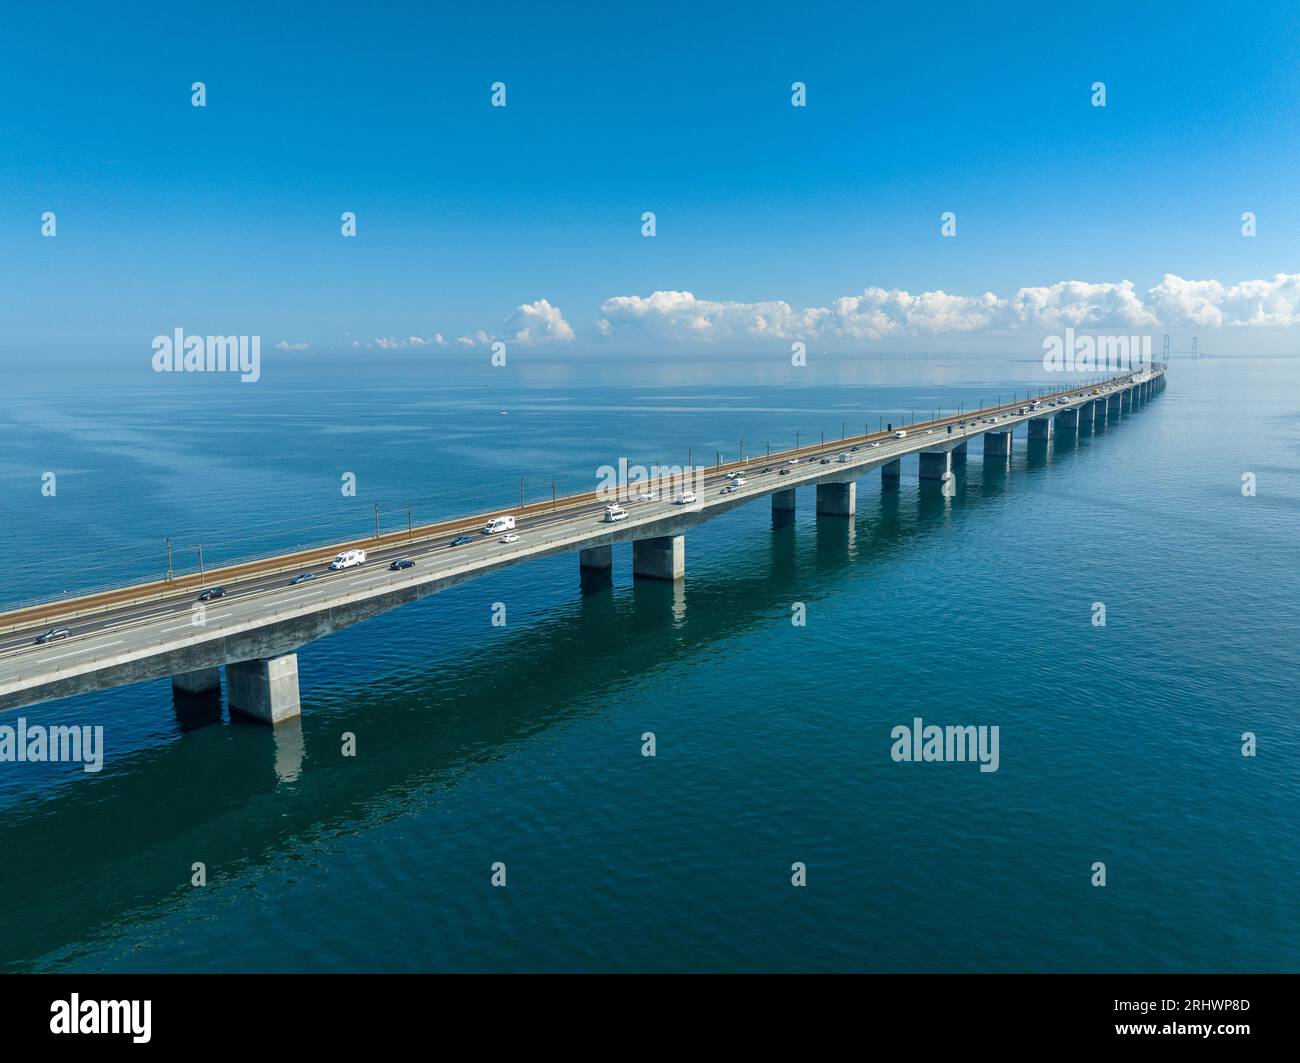 aerial view of the Great Belt Bridge in Denmark.  It connects the islands of Funen and Sealand across the Great Belt. Stock Photo